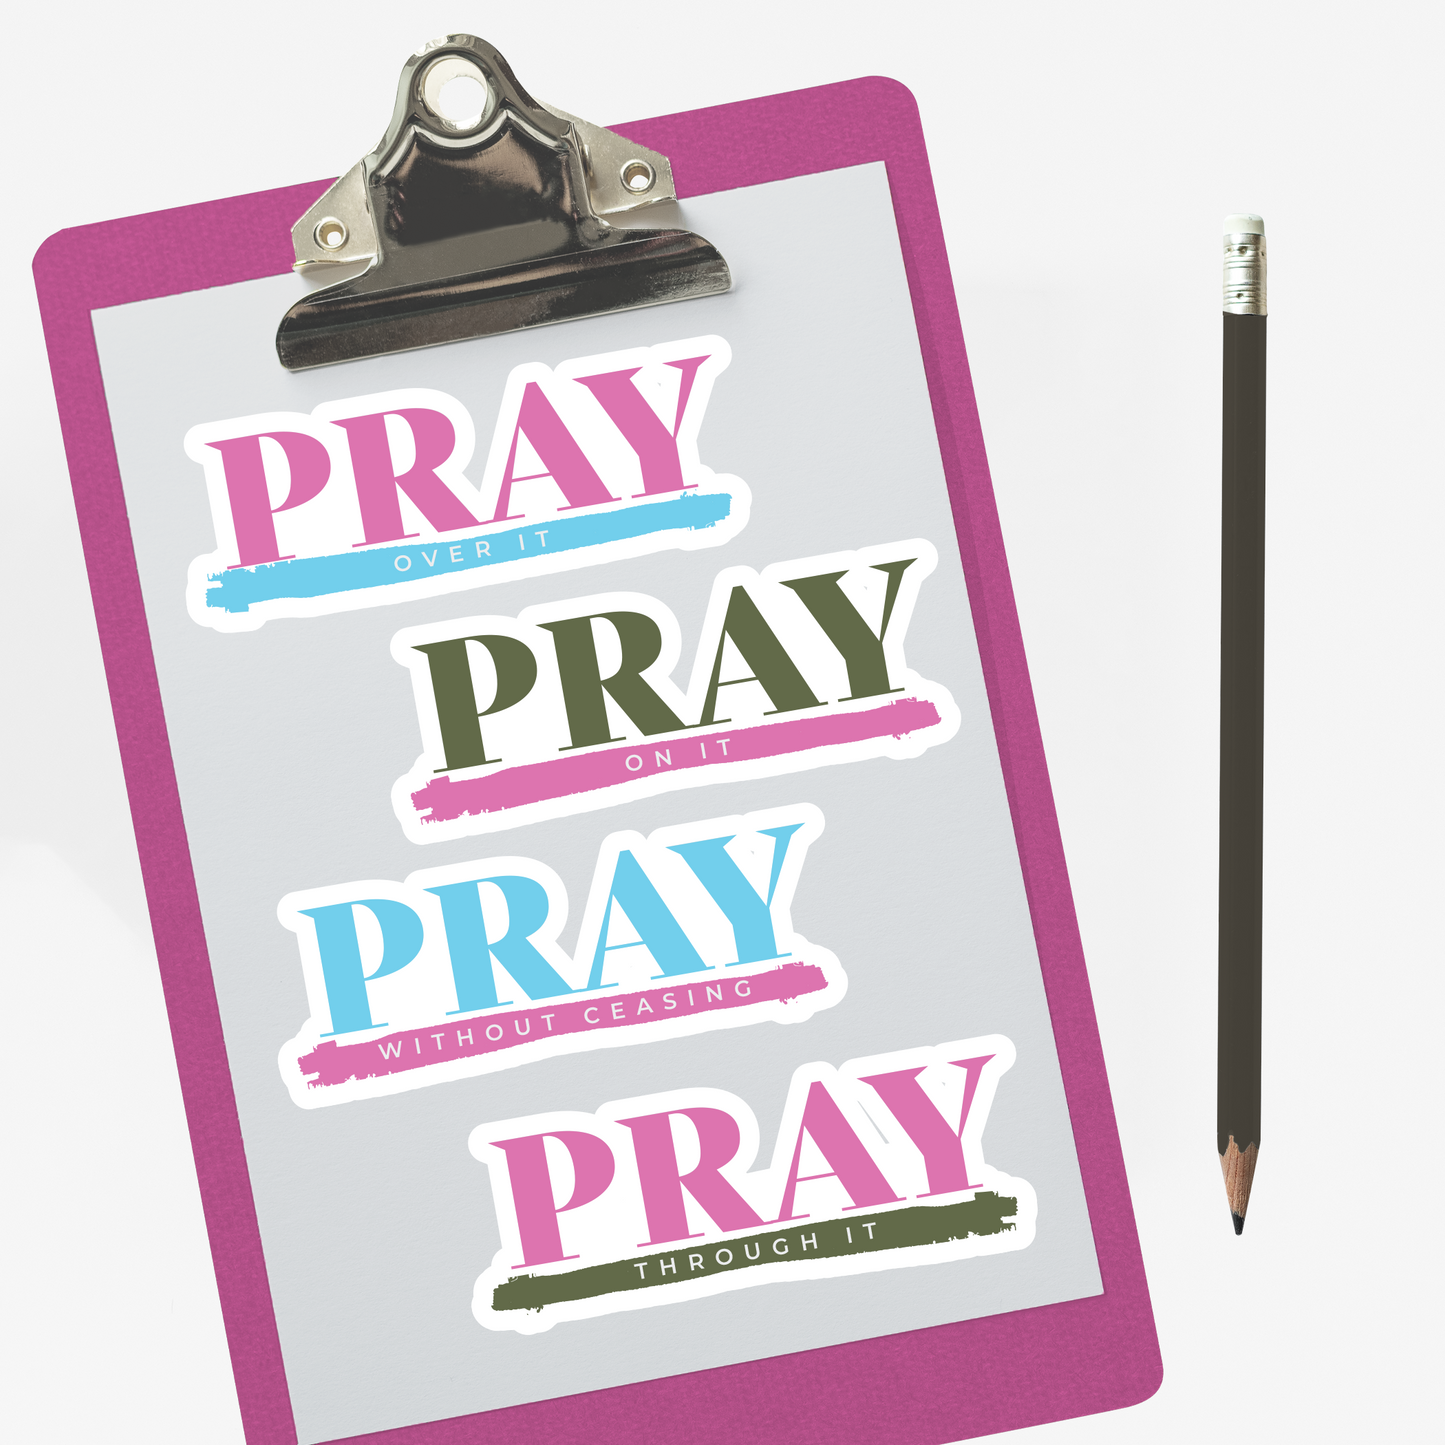 Pray | Over It | On It | Through It | Without Ceasing| Sticker Pack